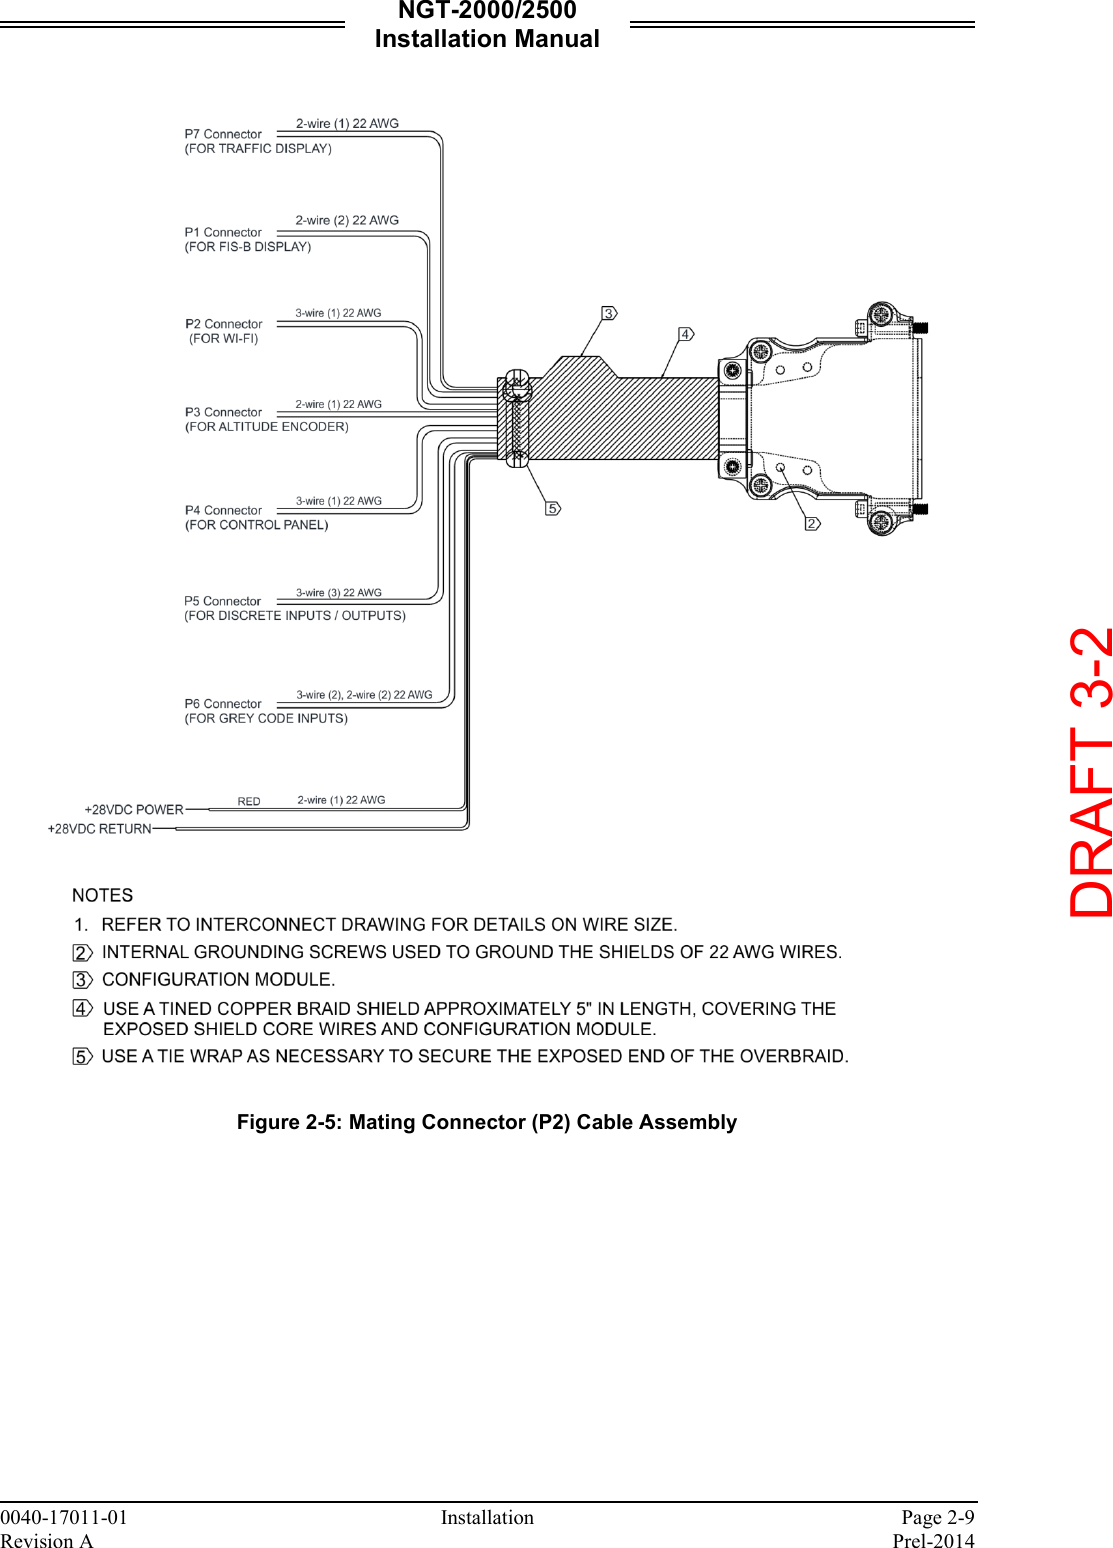 NGT-2000/2500 Installation Manual  0040-17011-01    Installation  Page 2-9 Revision A    Prel-2014    Figure 2-5: Mating Connector (P2) Cable Assembly     DRAFT 3-2